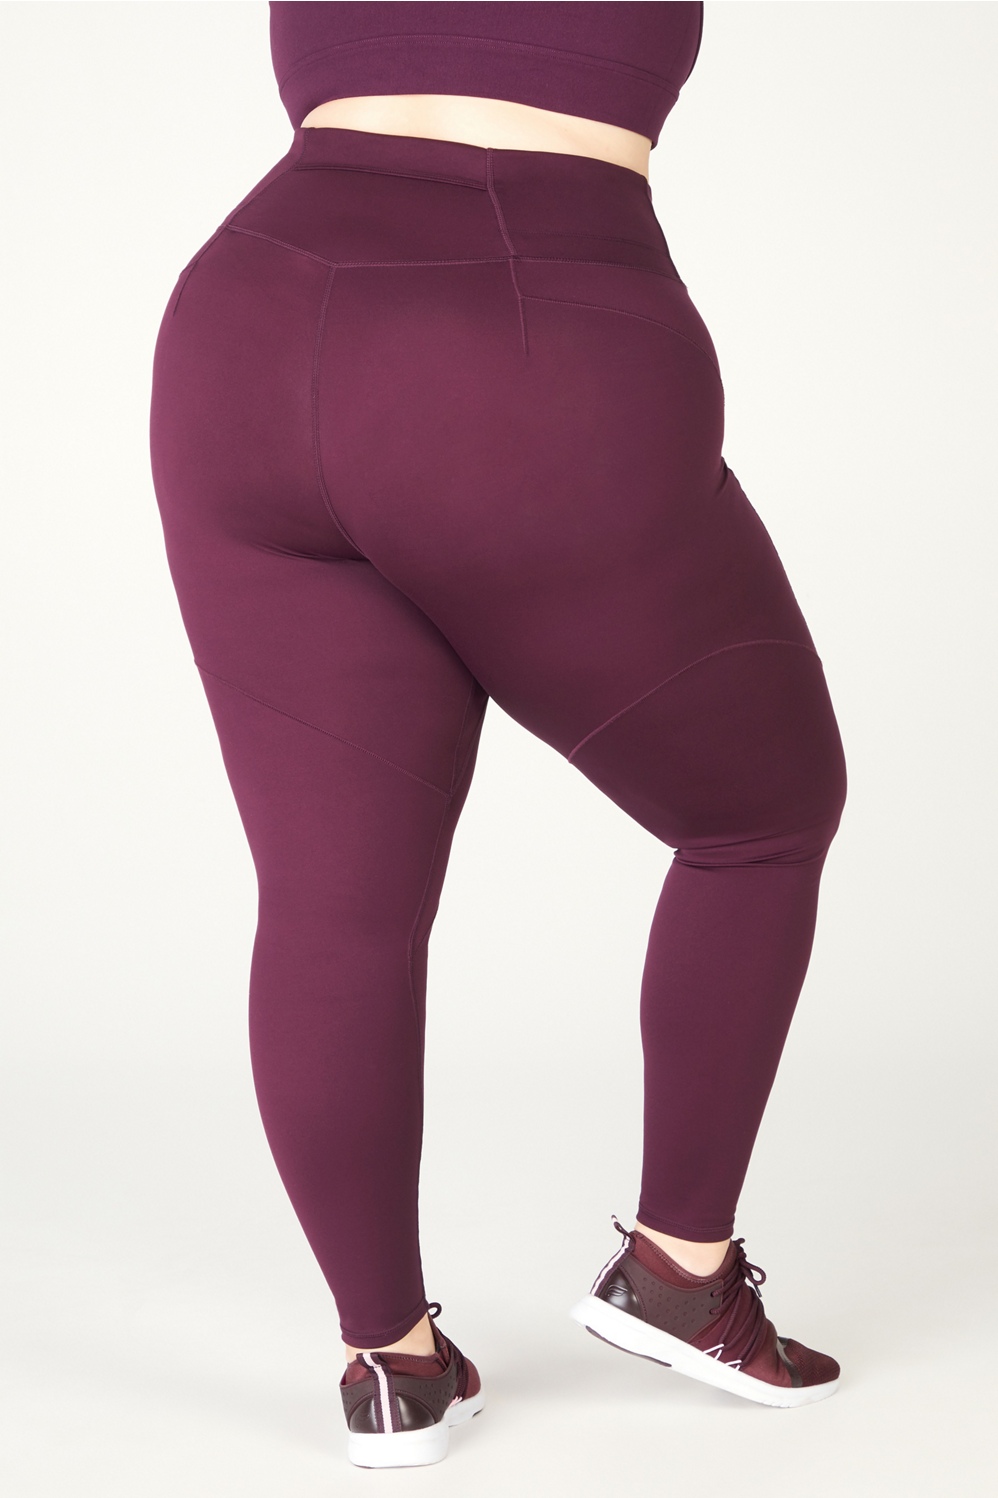 Wild Fable Size Med High-Waisted Side Pockets Ankle Length Leggings  Berry/Maroon